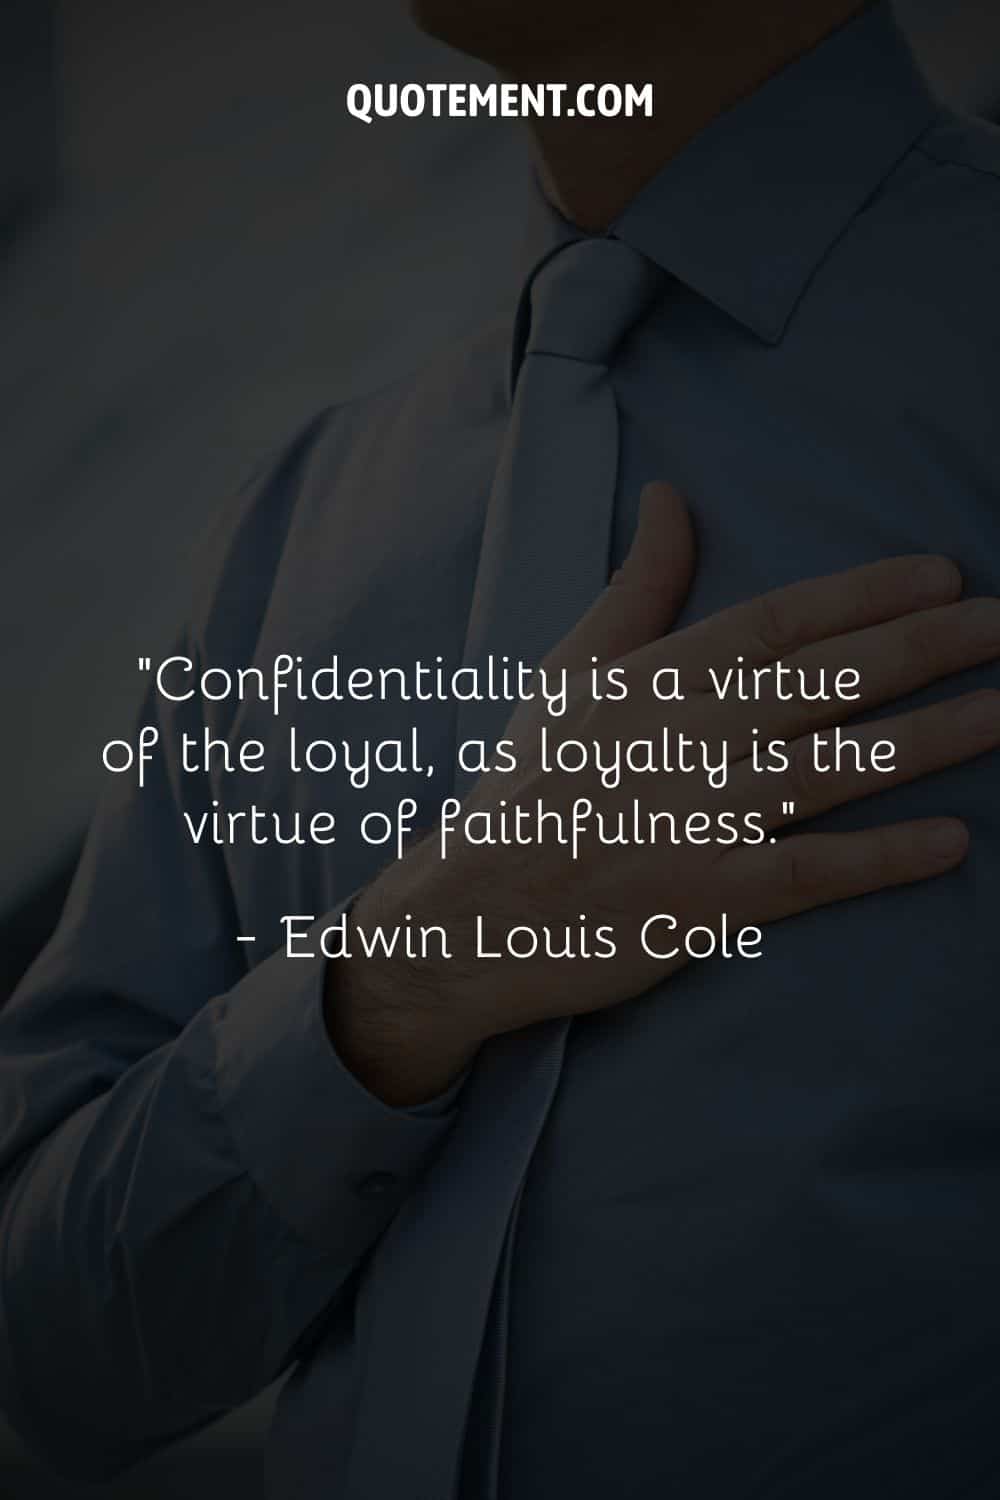 “Confidentiality is a virtue of the loyal, as loyalty is the virtue of faithfulness.” ― Edwin Louis Cole